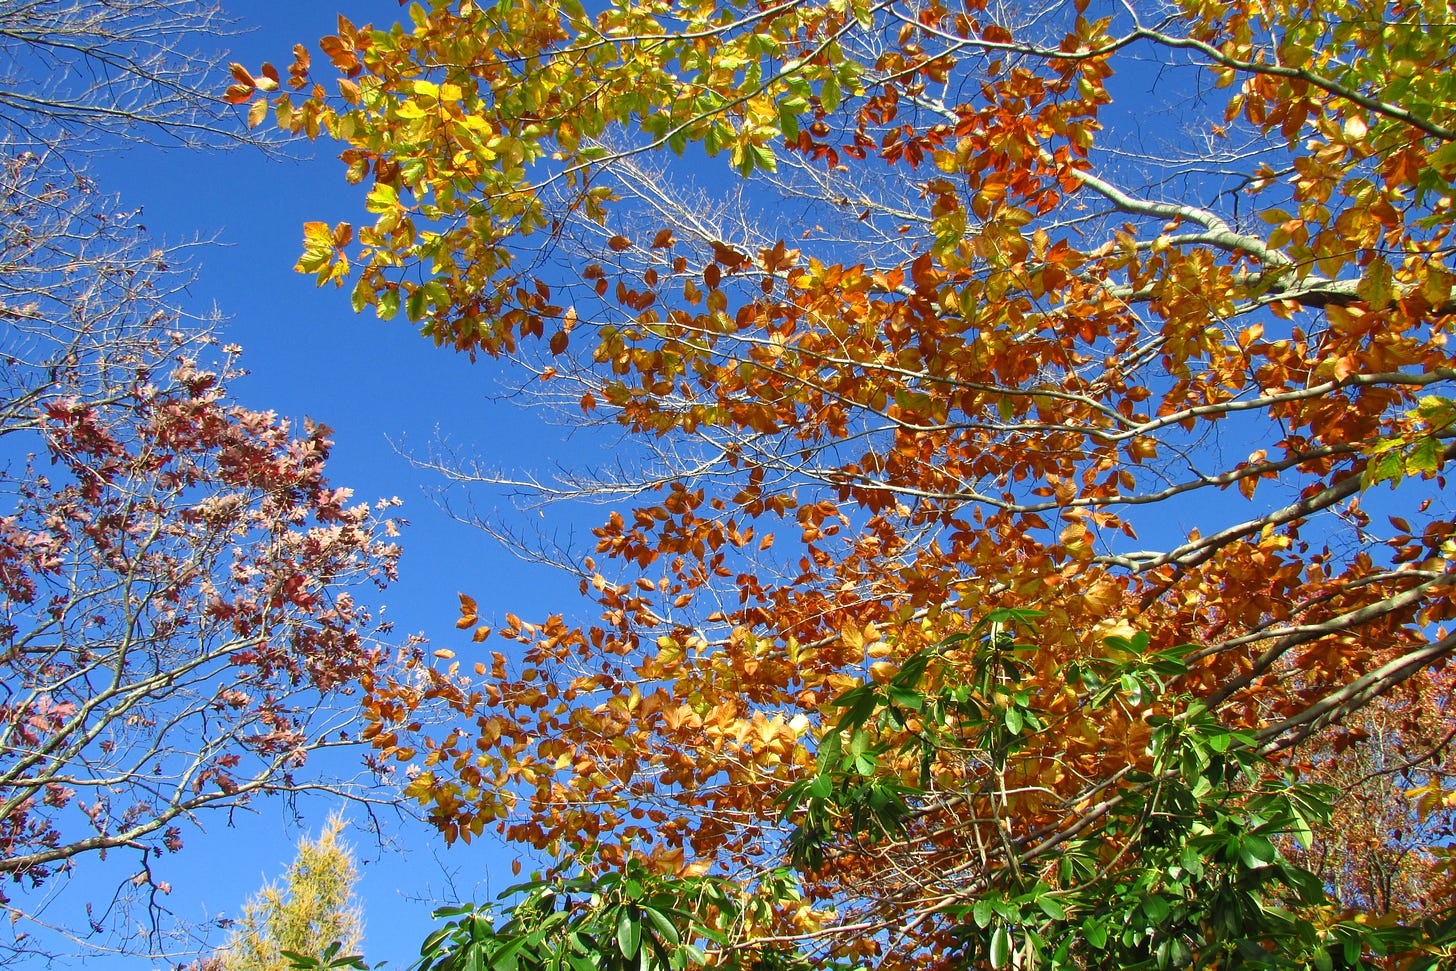 A bright blue sky with red, green, yellow, and orange leaves and a few bare branches in the foreground